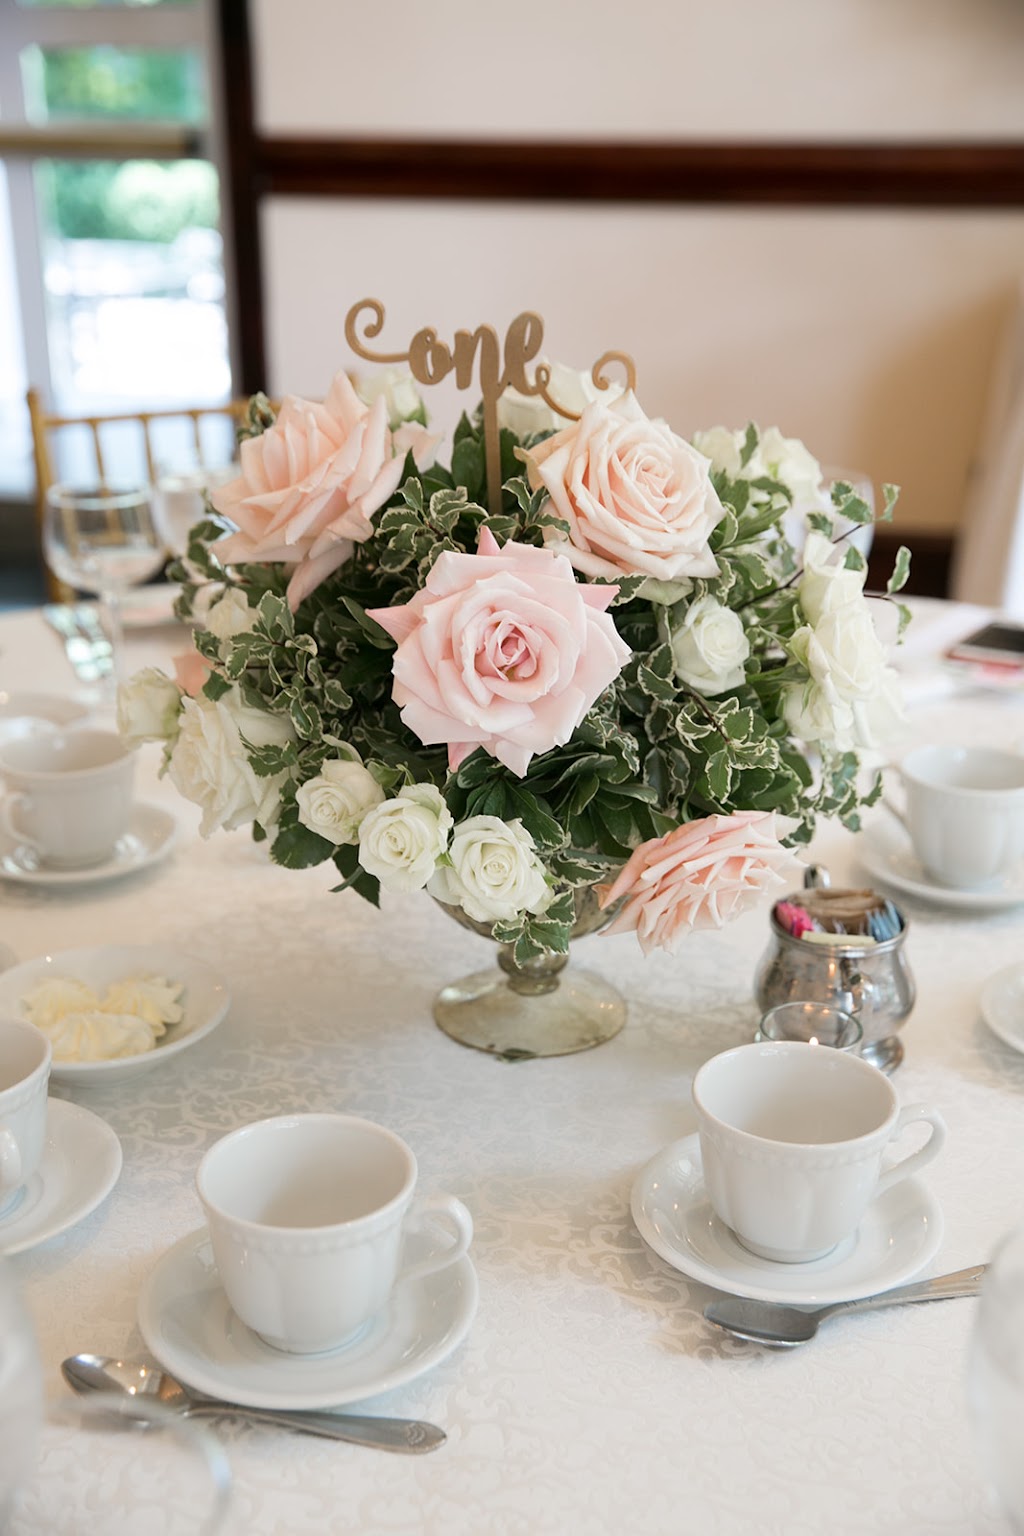 Something Blue Floral Events | 70 Browns River Rd, Sayville, NY 11782 | Phone: (631) 244-0850